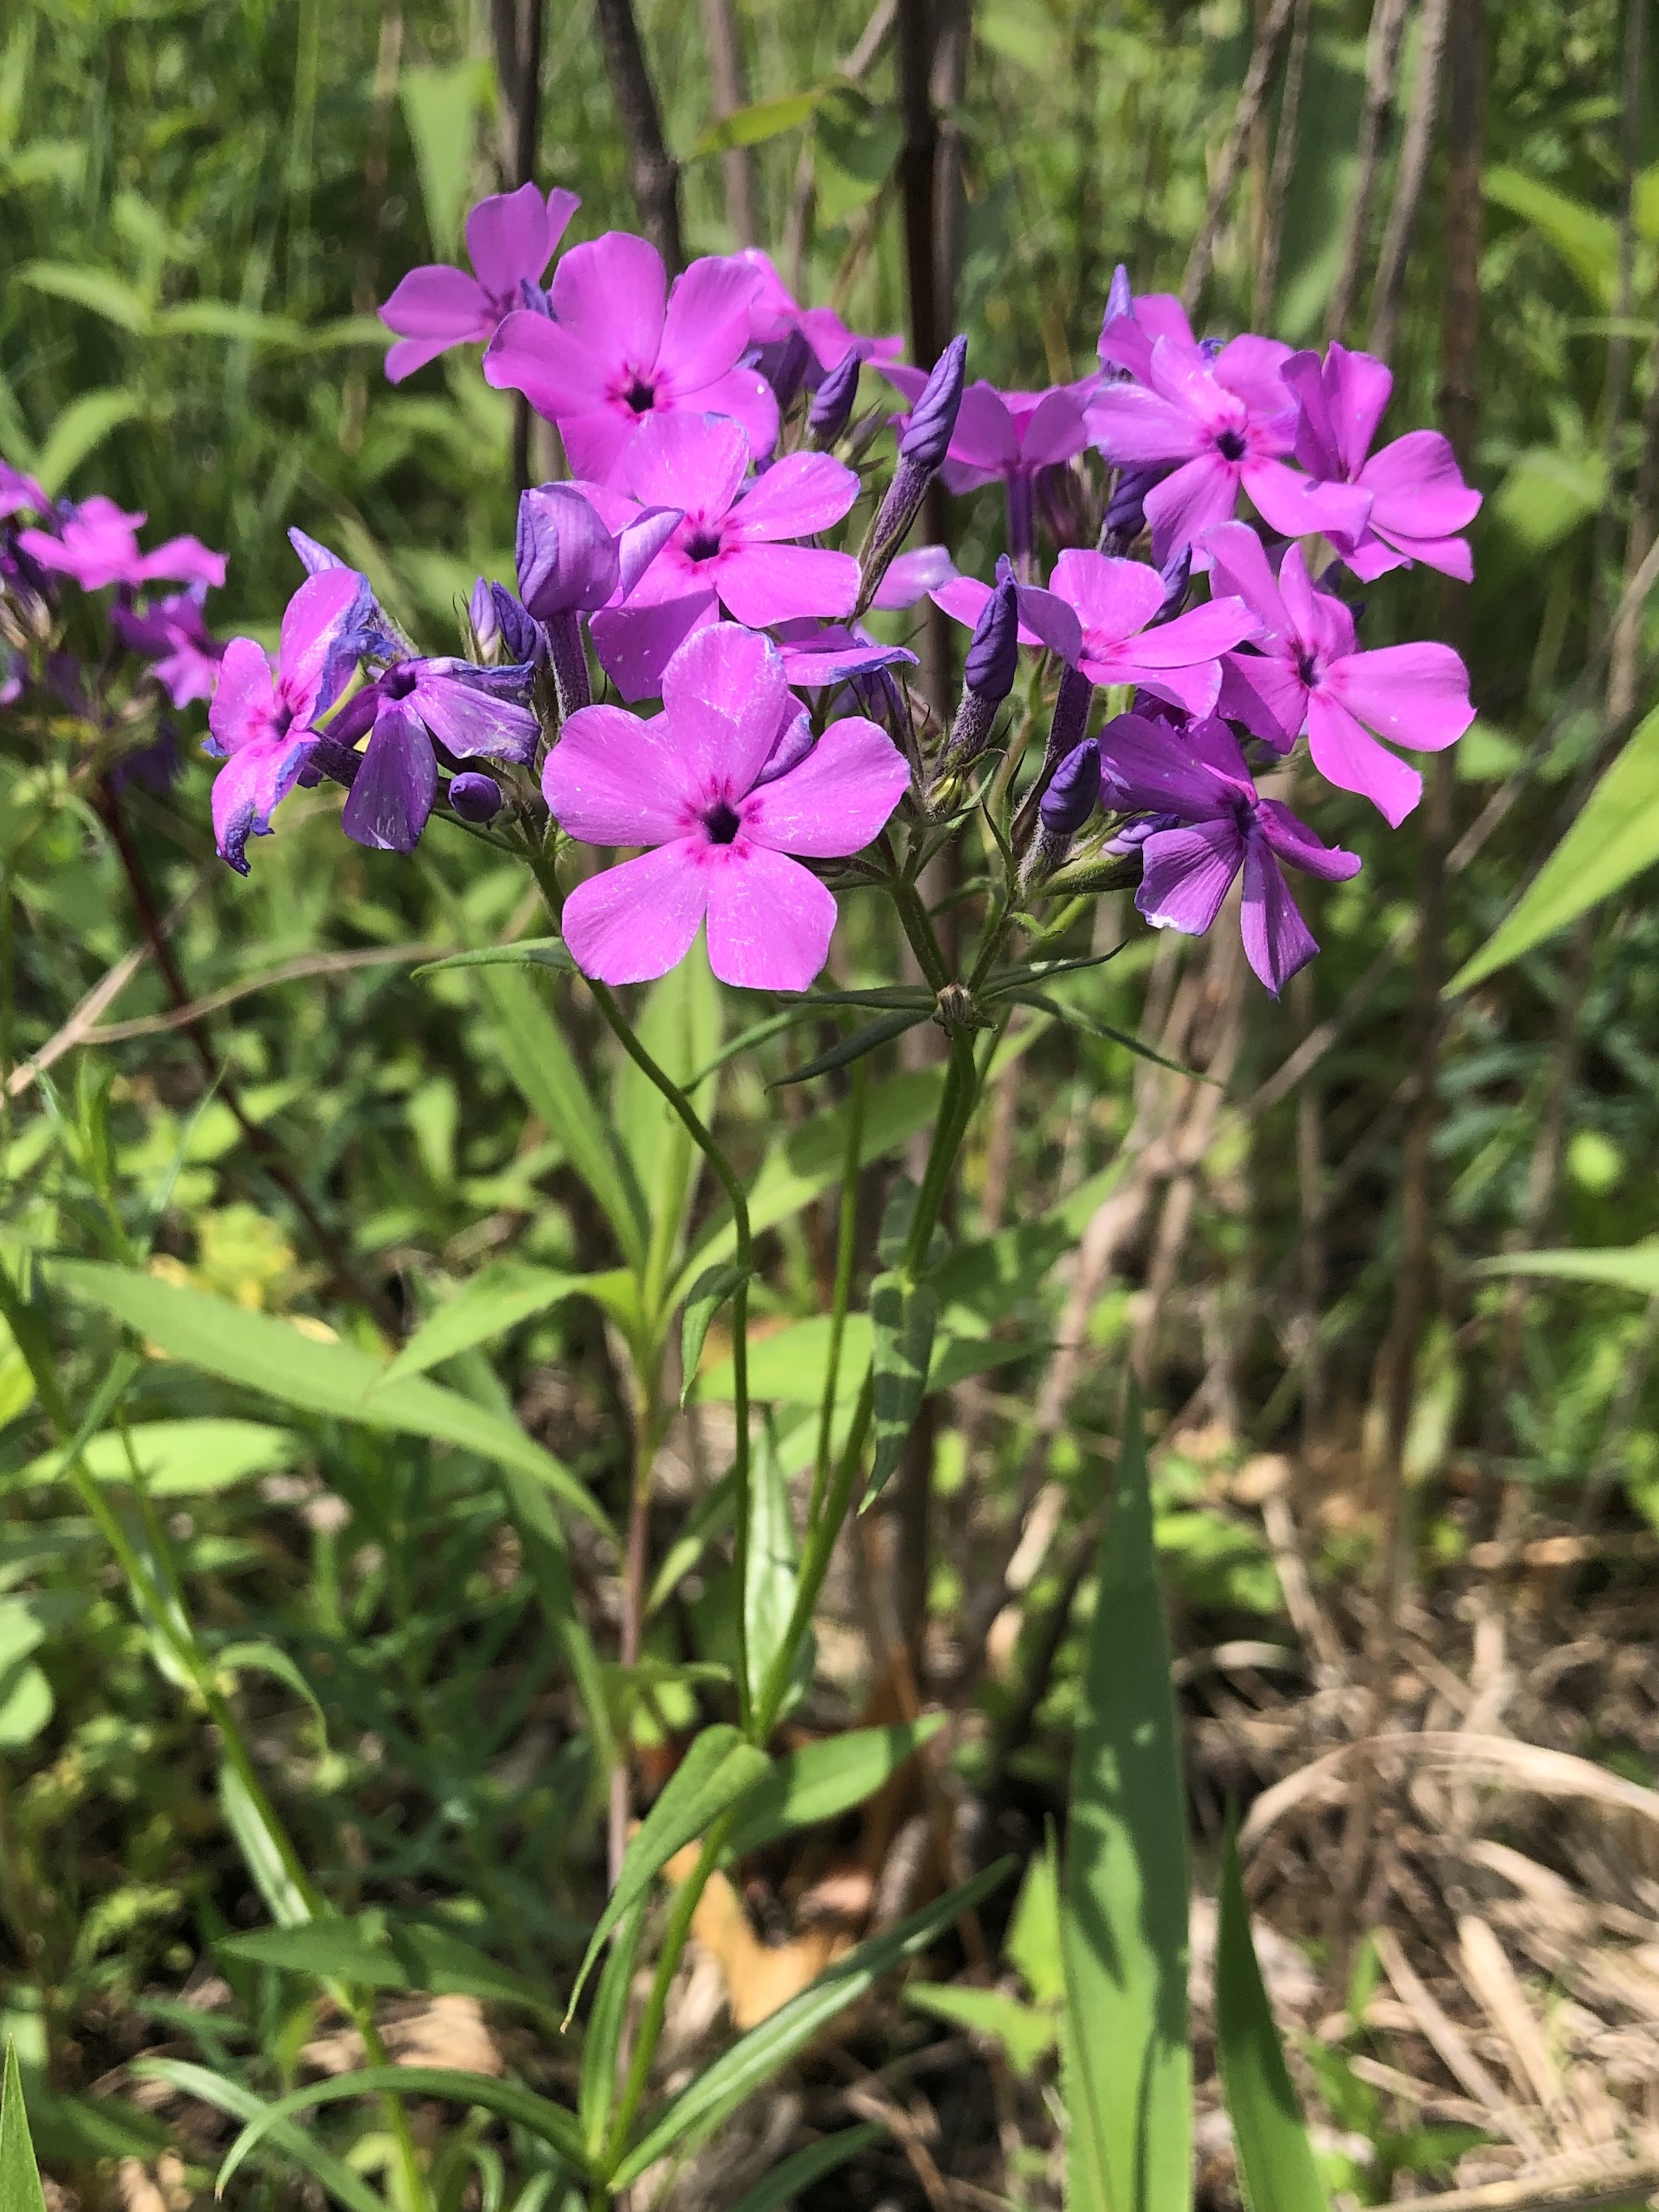 Prairie Phlox in the Curtis Prairie in the University of Wisconsin-Madison Arboretum in Madison, Wisconsin on May 30, 2022.